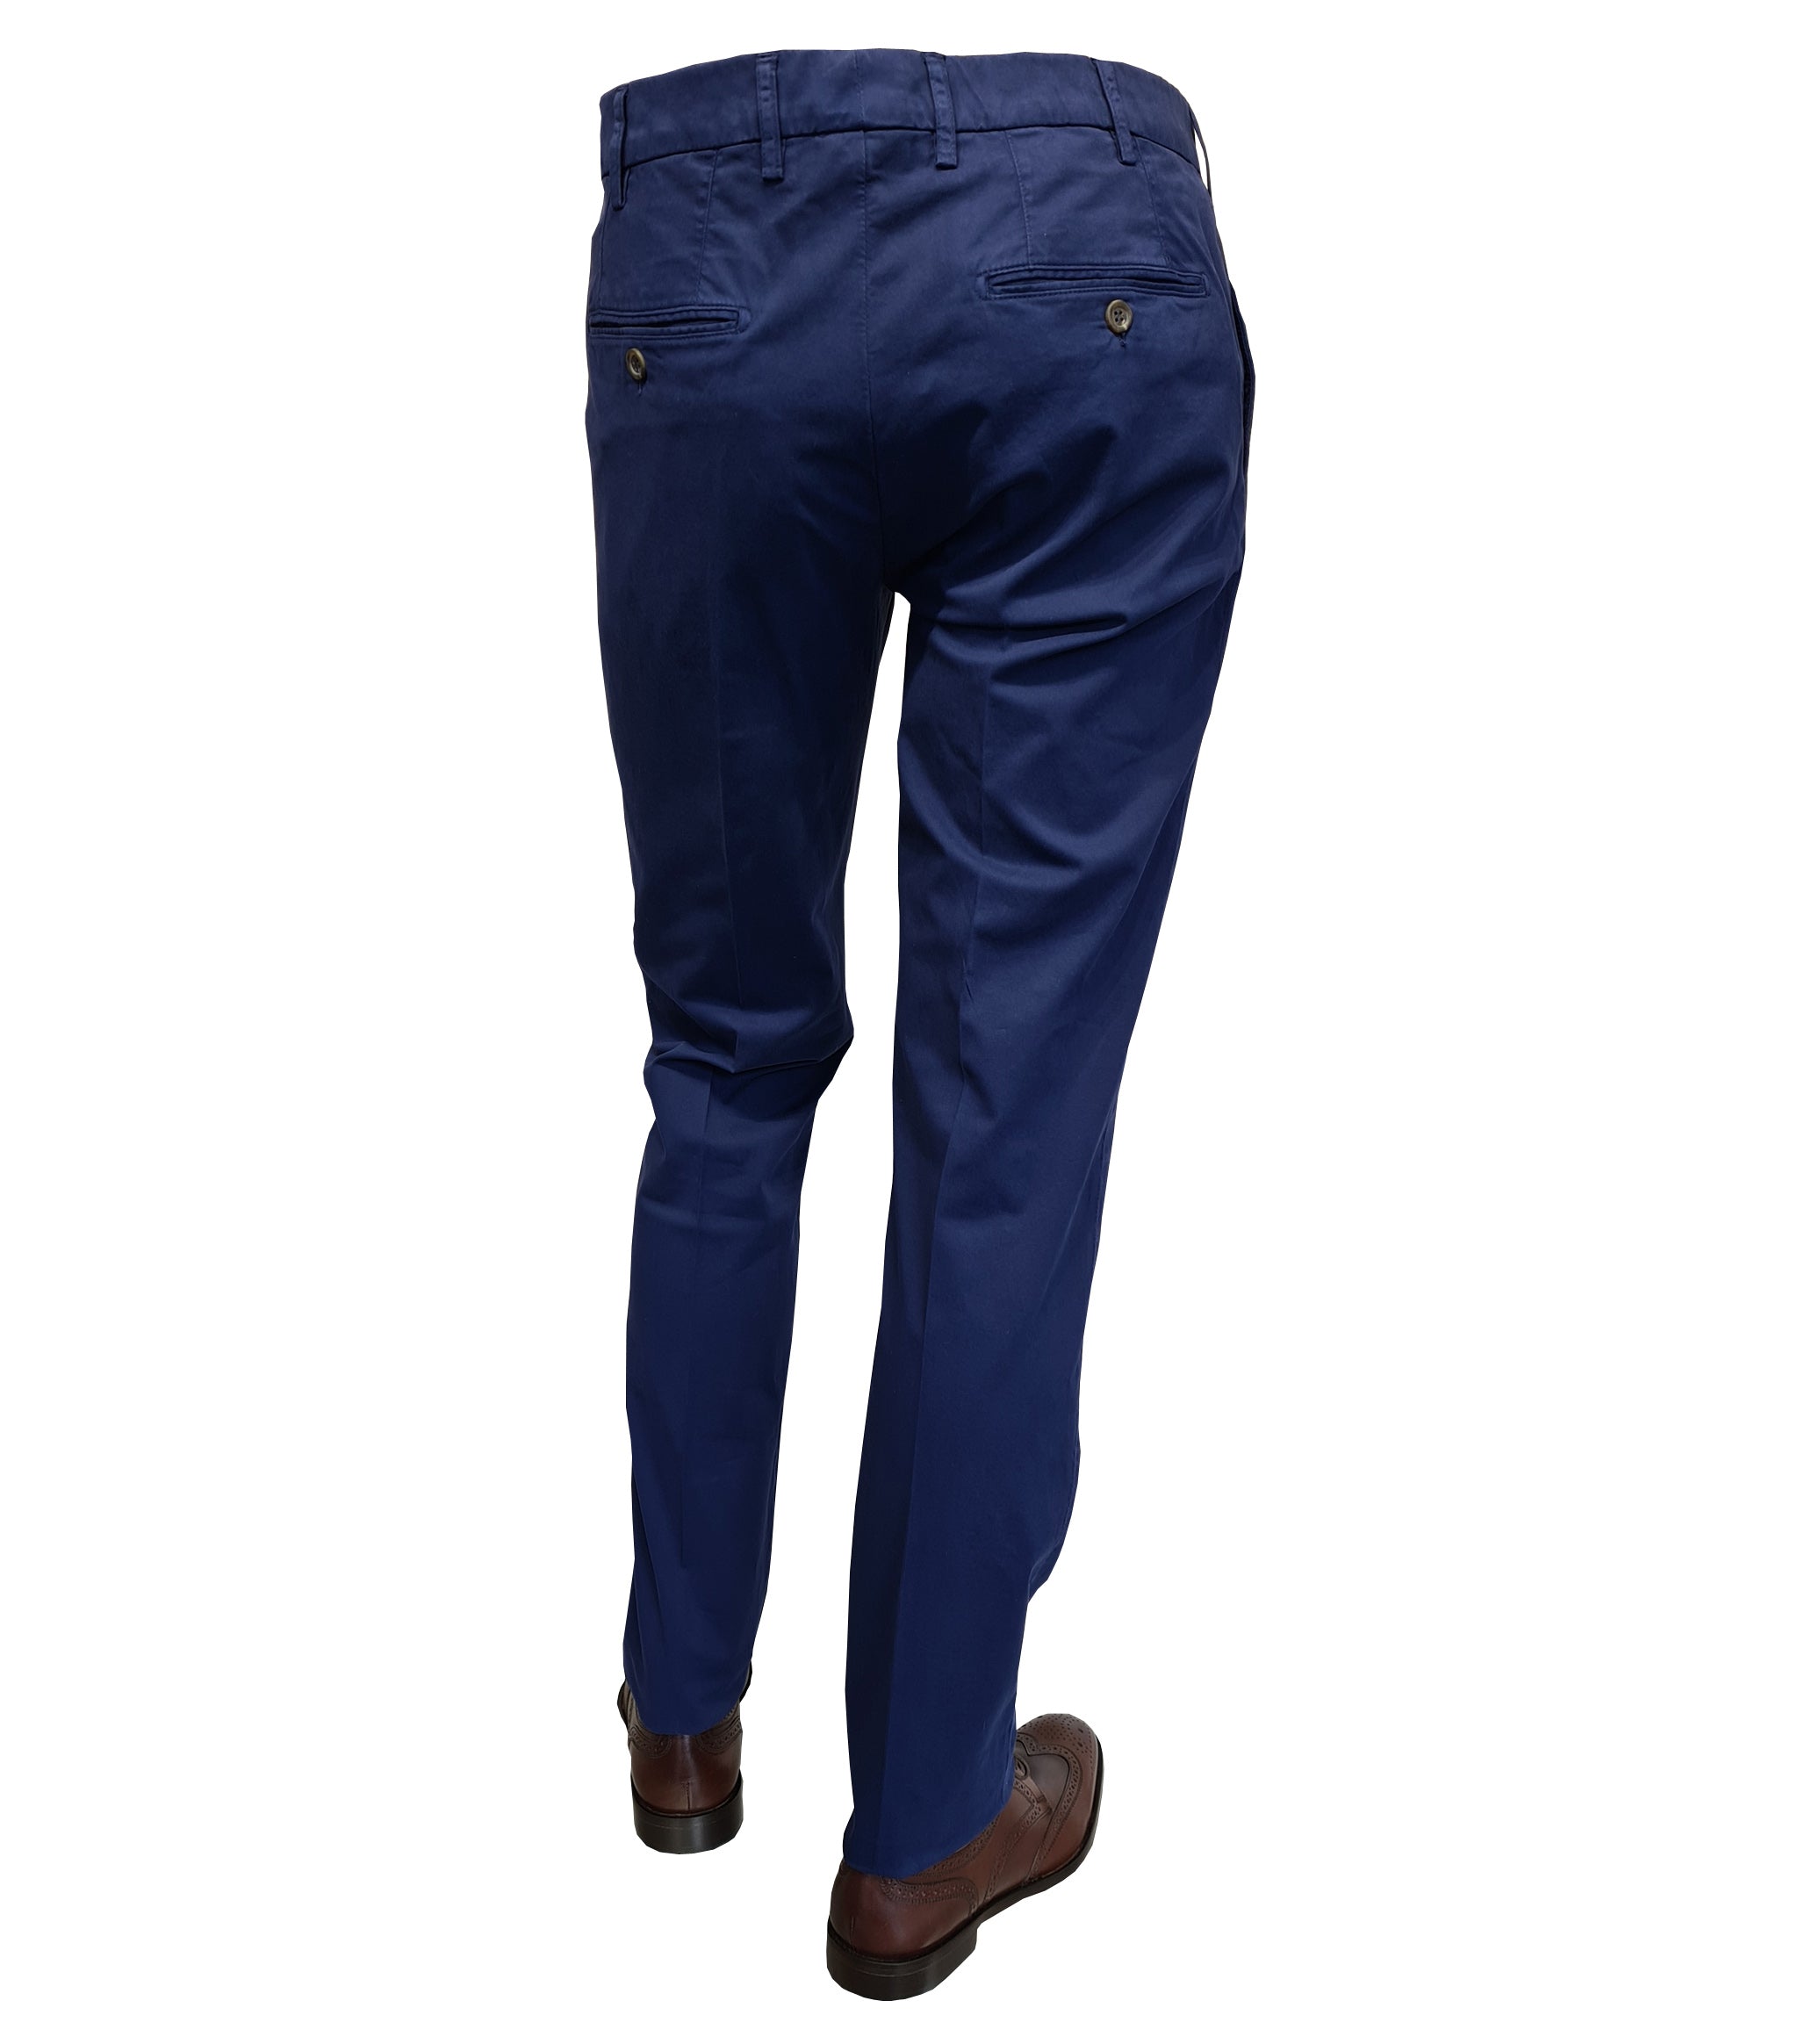 CANALI - Navy Blue Cotton Stretch Chinos 91633-PT00452-305